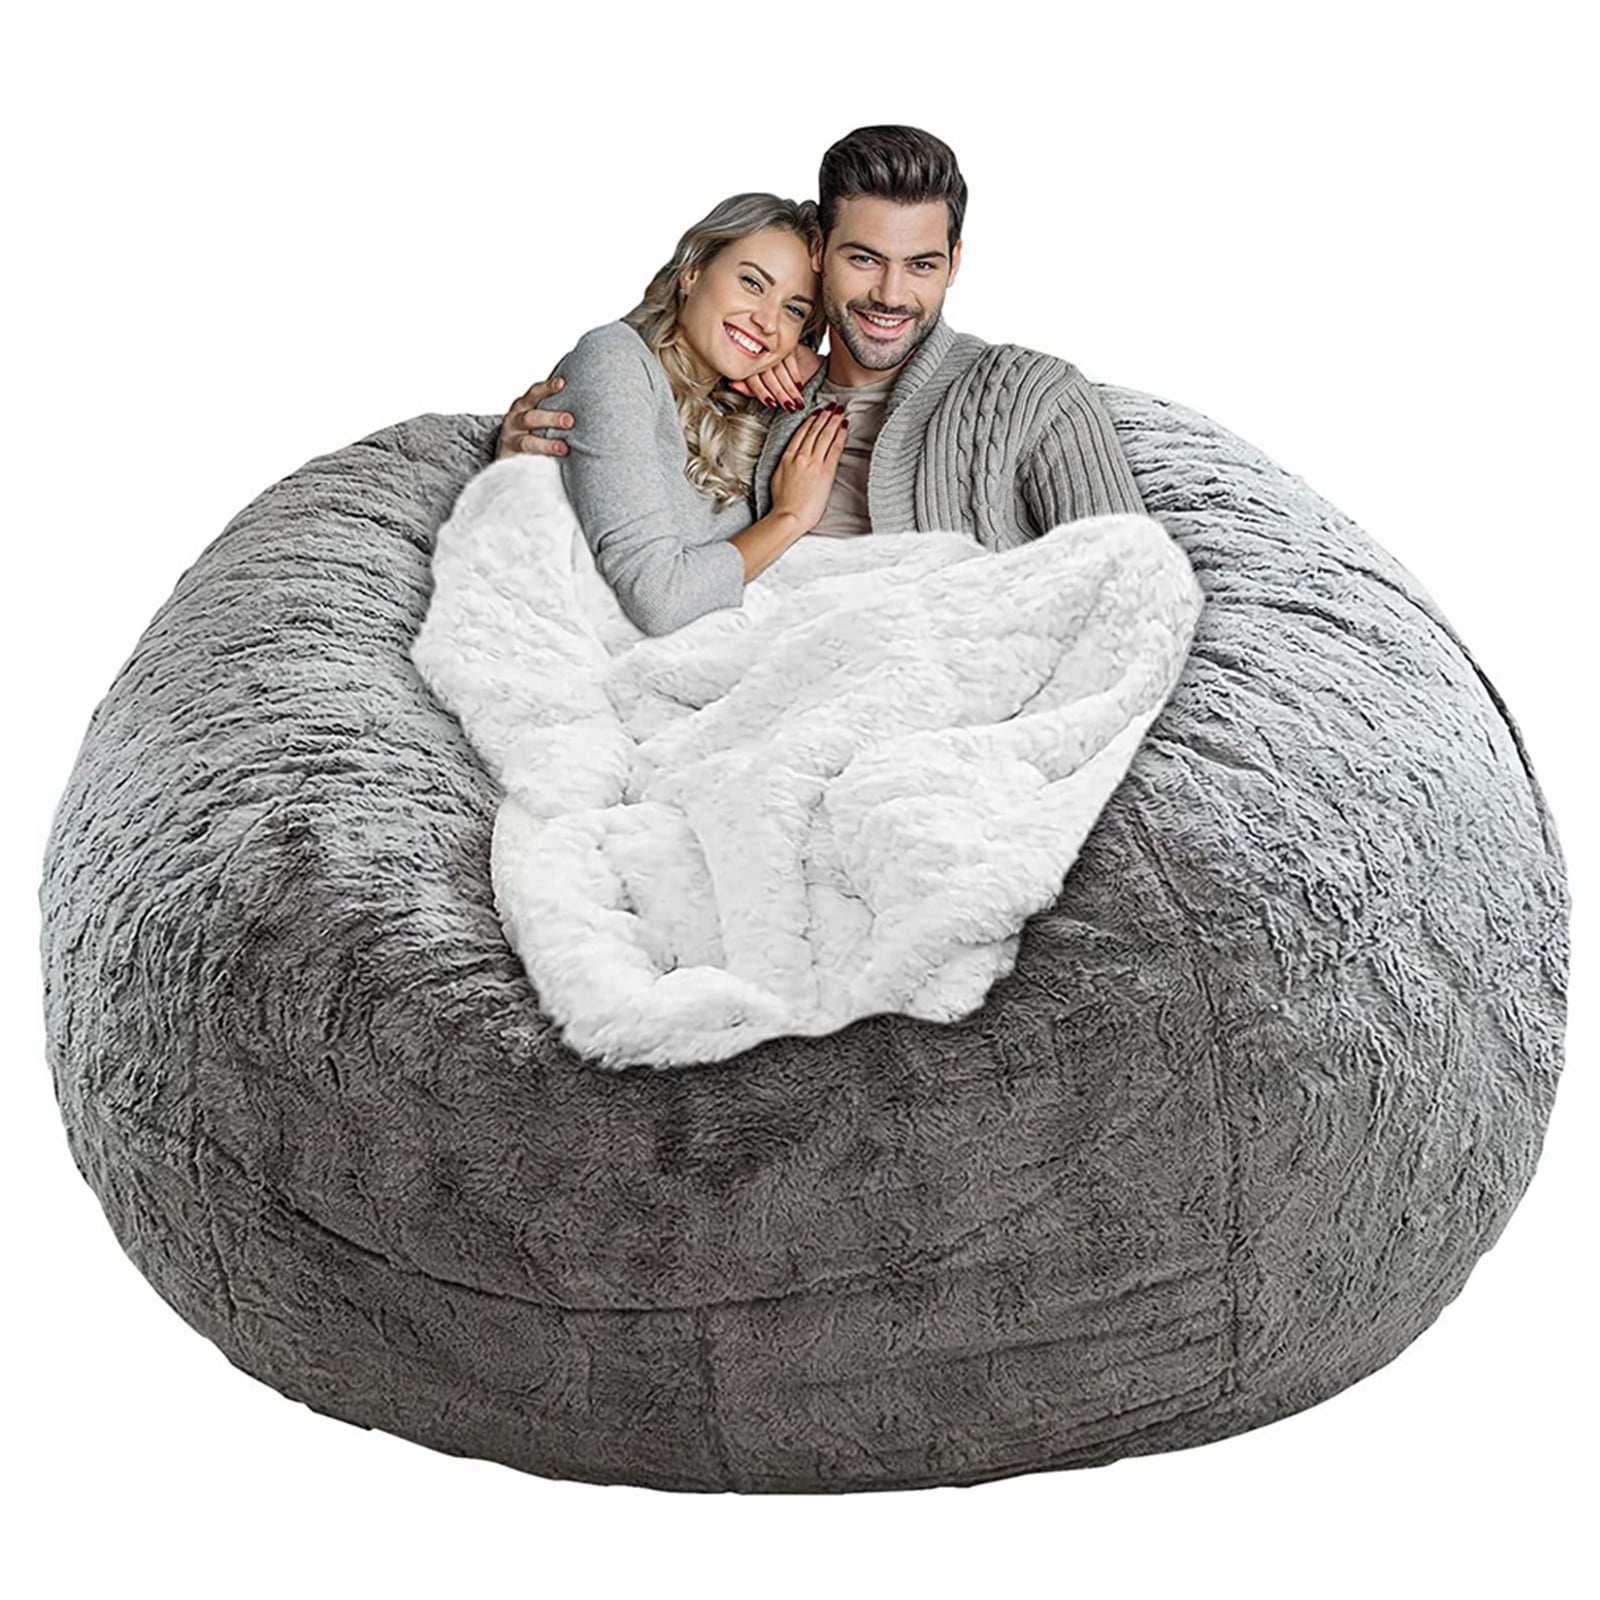  Bean Bag Chair Cover, Giant 6ft Bean Bag for Adults(No Filler),  Living Room Furniture Round Soft Fluffy Faux Fur Bean Bag Lazy Sofa Bed  Cover(Snow Grey Color) : Home & Kitchen